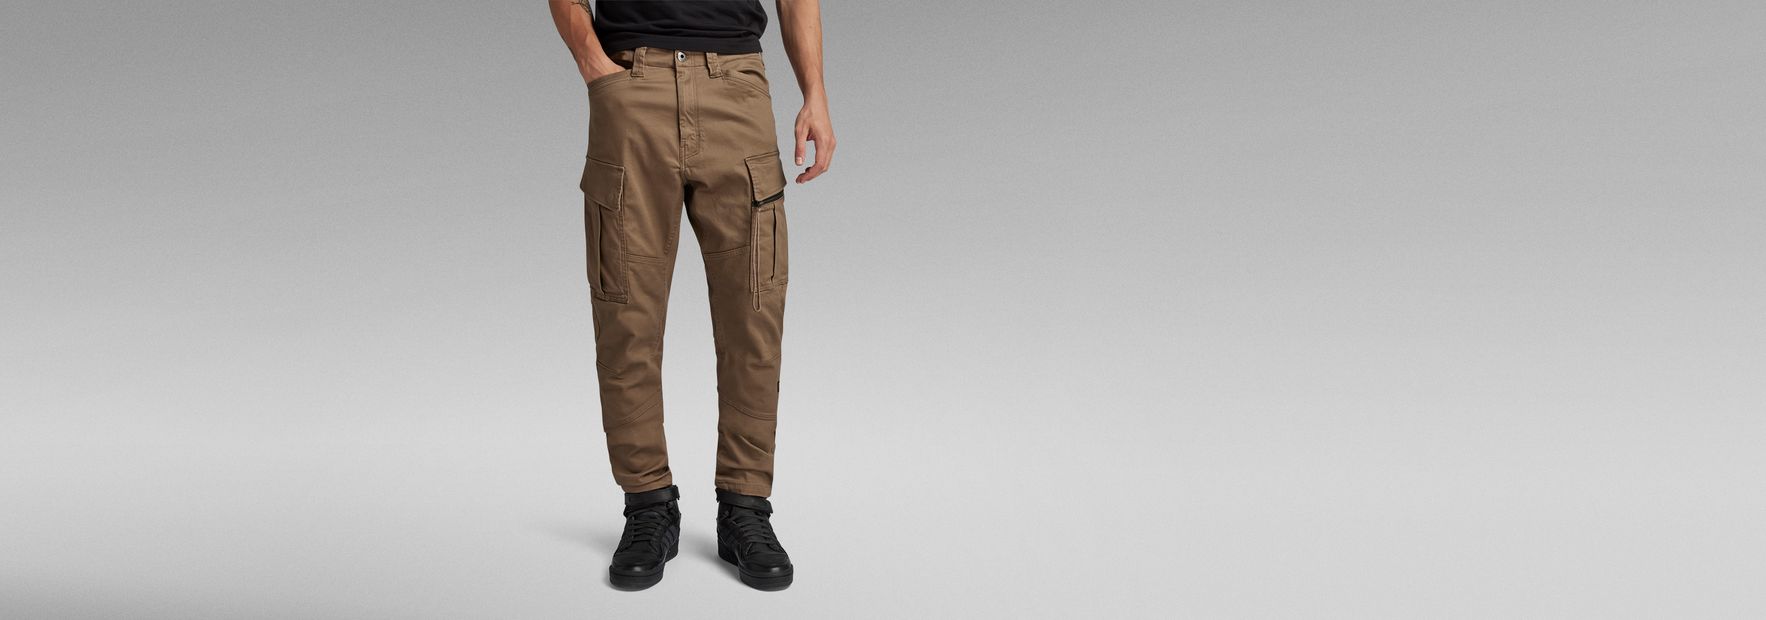 Tapered cargo pants G-Star E. Lifevest 3D - Trousers and Jogging - Clothing  - Men